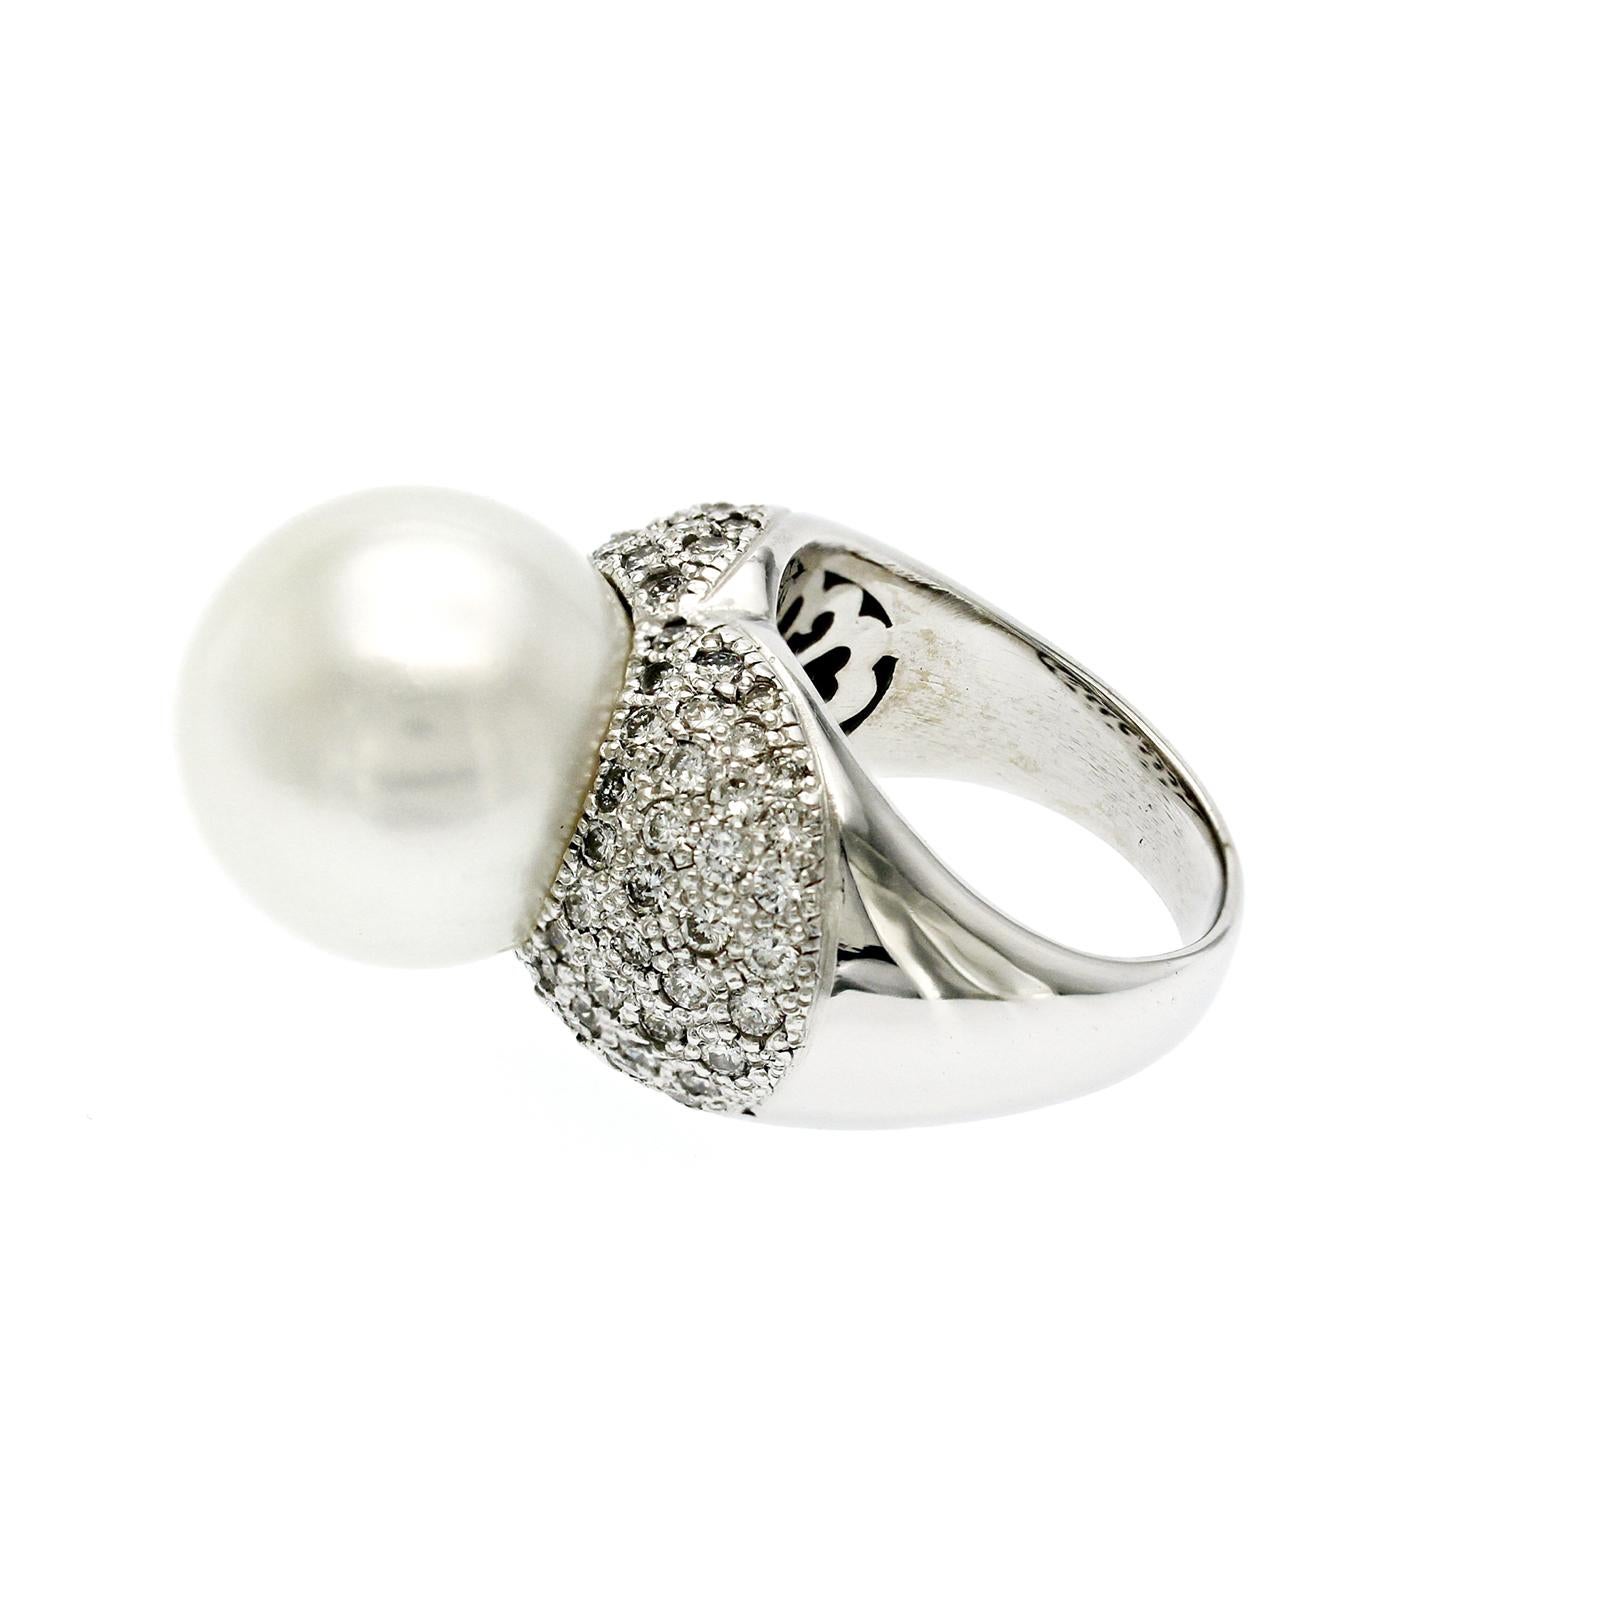 South Sea Pearl 15MM & Diamond Pave 14K White Gold Solitaire Ring For Sale 2